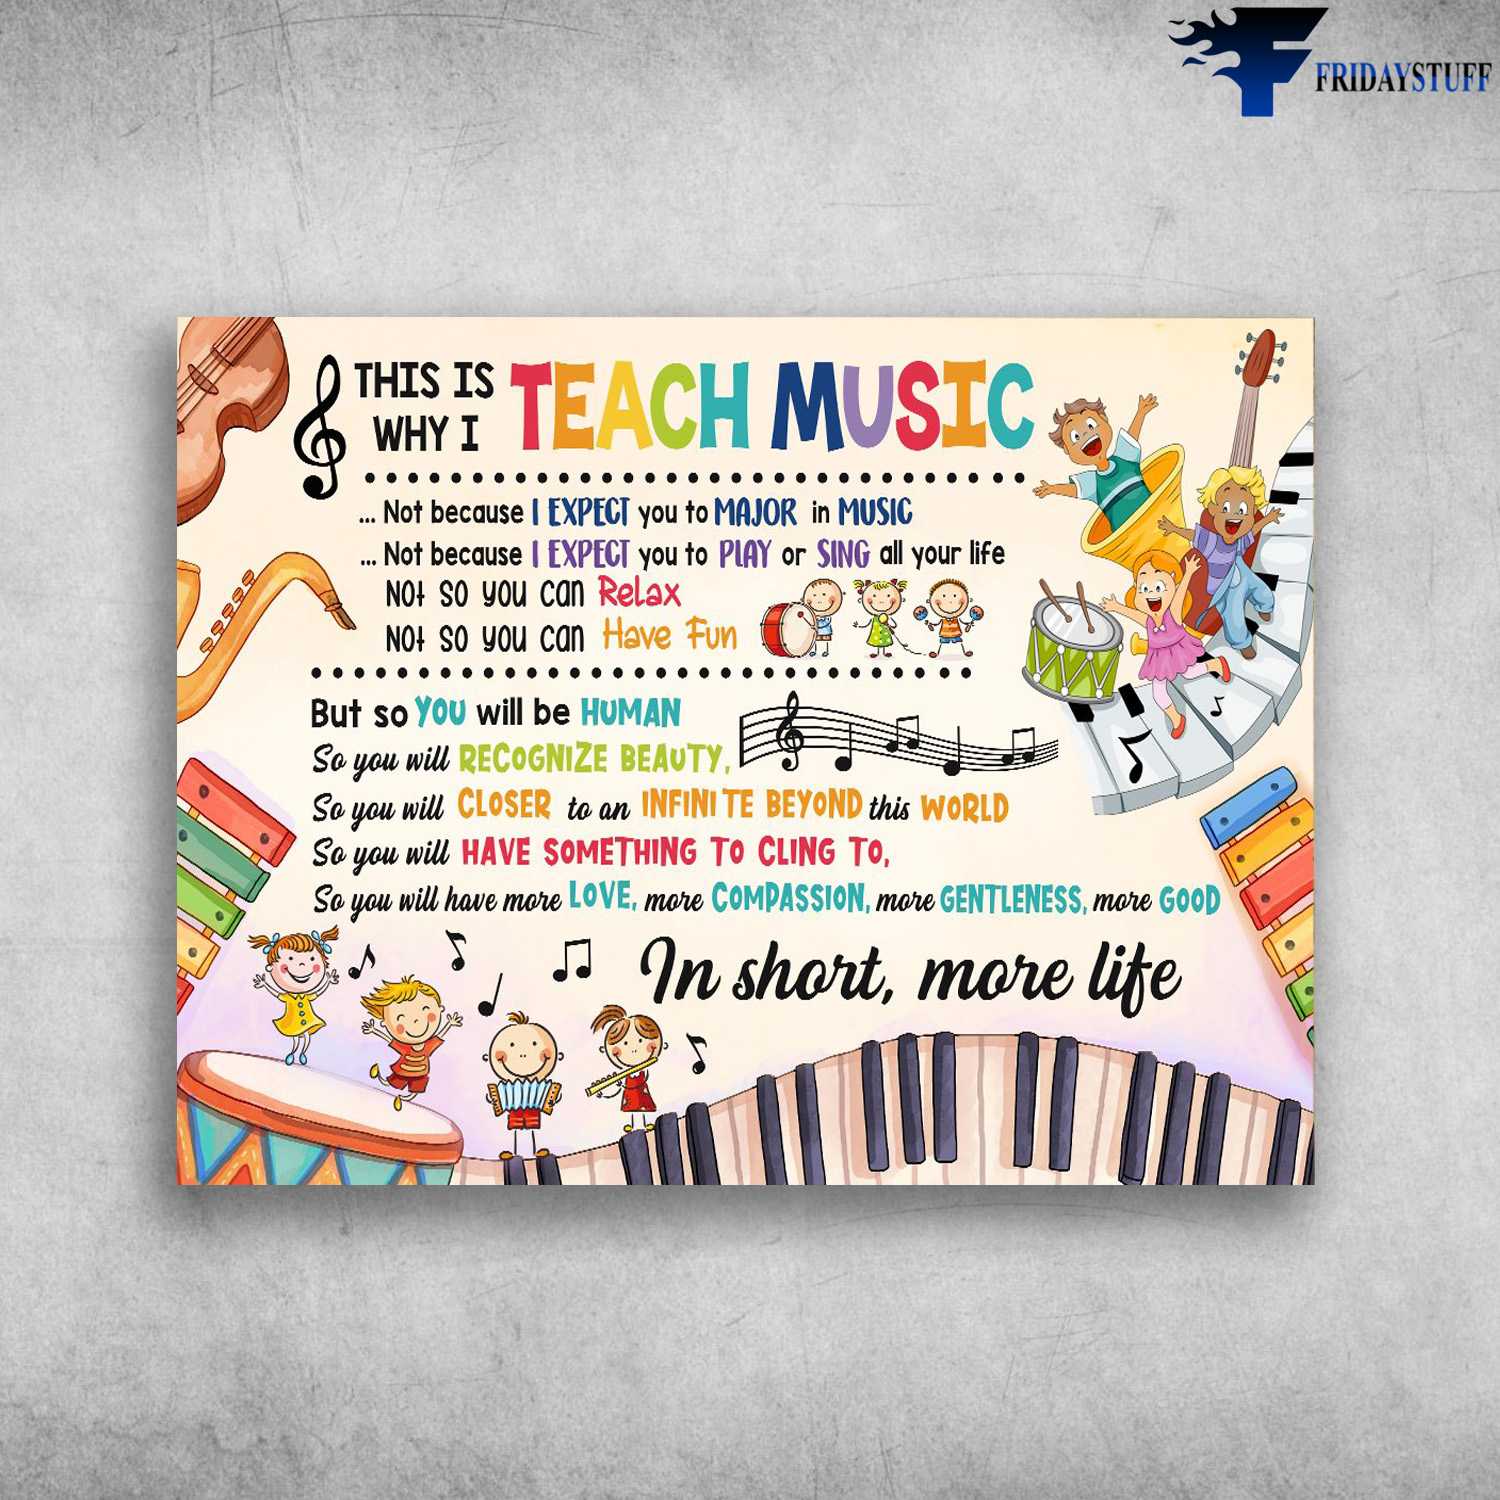 Music Class, Classroom Poster - This Is Why I Teach Music, Not Because I Expect You, To Major Music, Not Because I Expect You, To Play Or Sing All Your Life